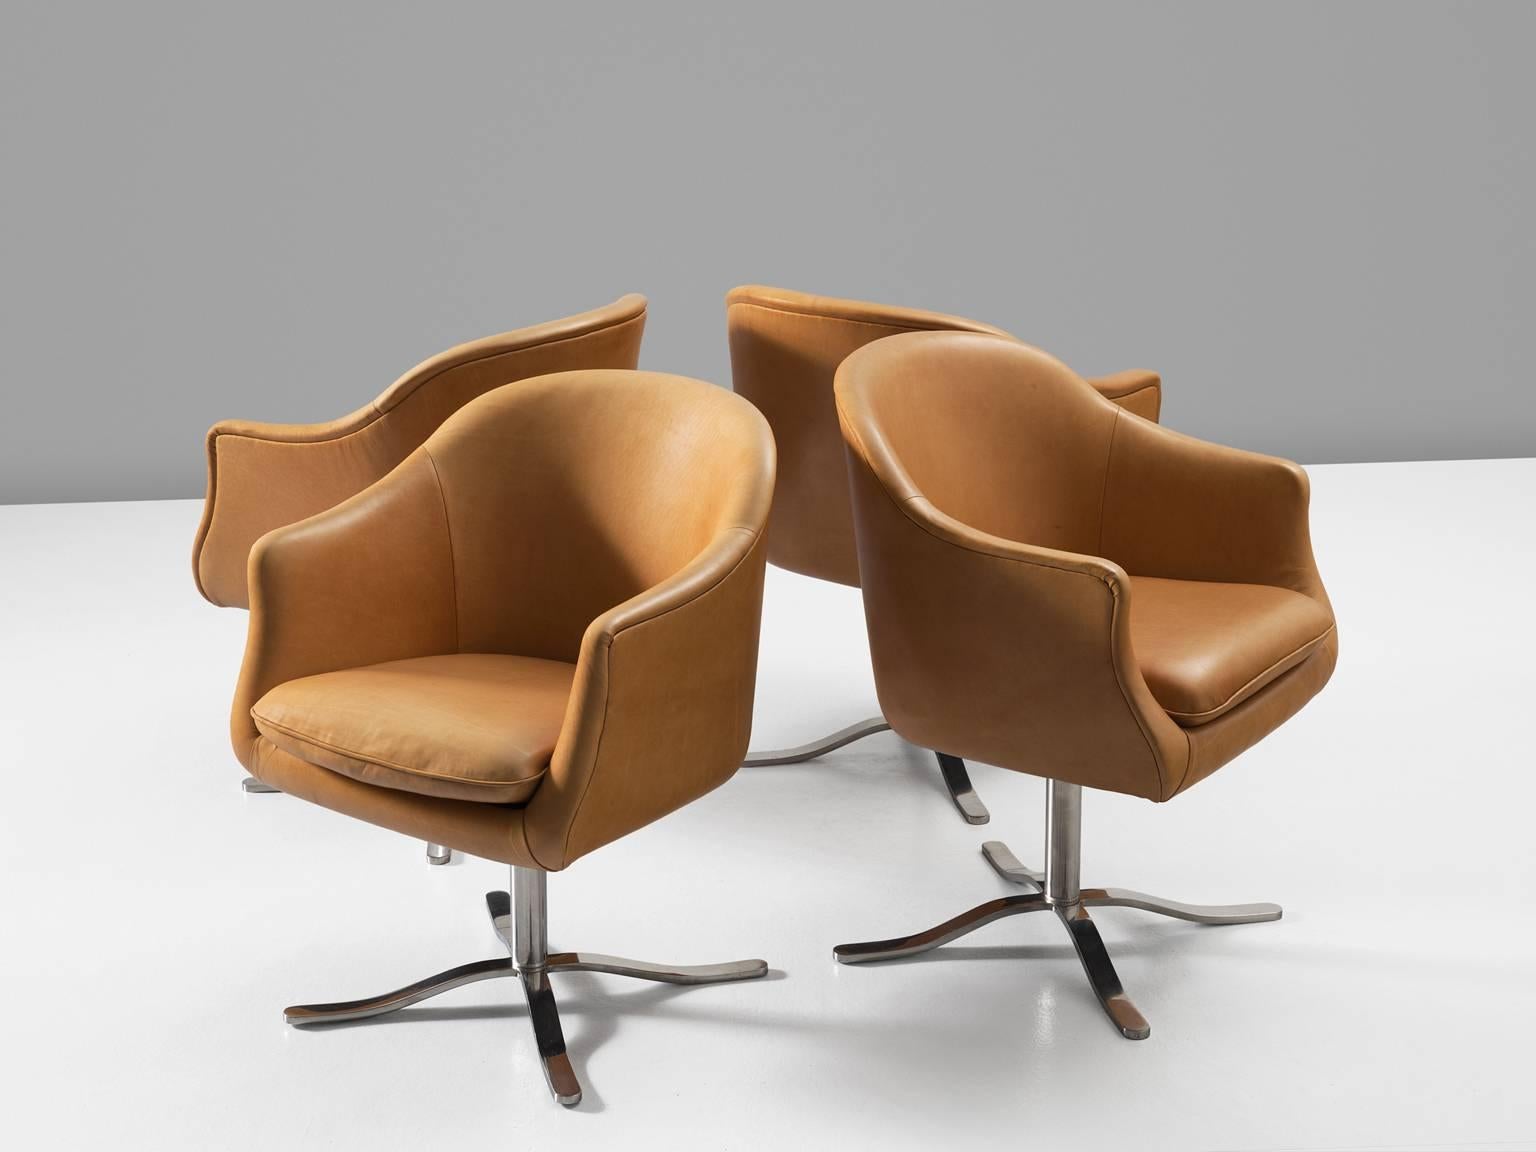 Set of four swivel chairs in metal and leather, 1960s. 

Four cognac leather conference chairs. Very comfortable swivel desk chairs in natural cognac leather. The base consists of four curved chrome legs. The legs nicely follow the smooth lines of